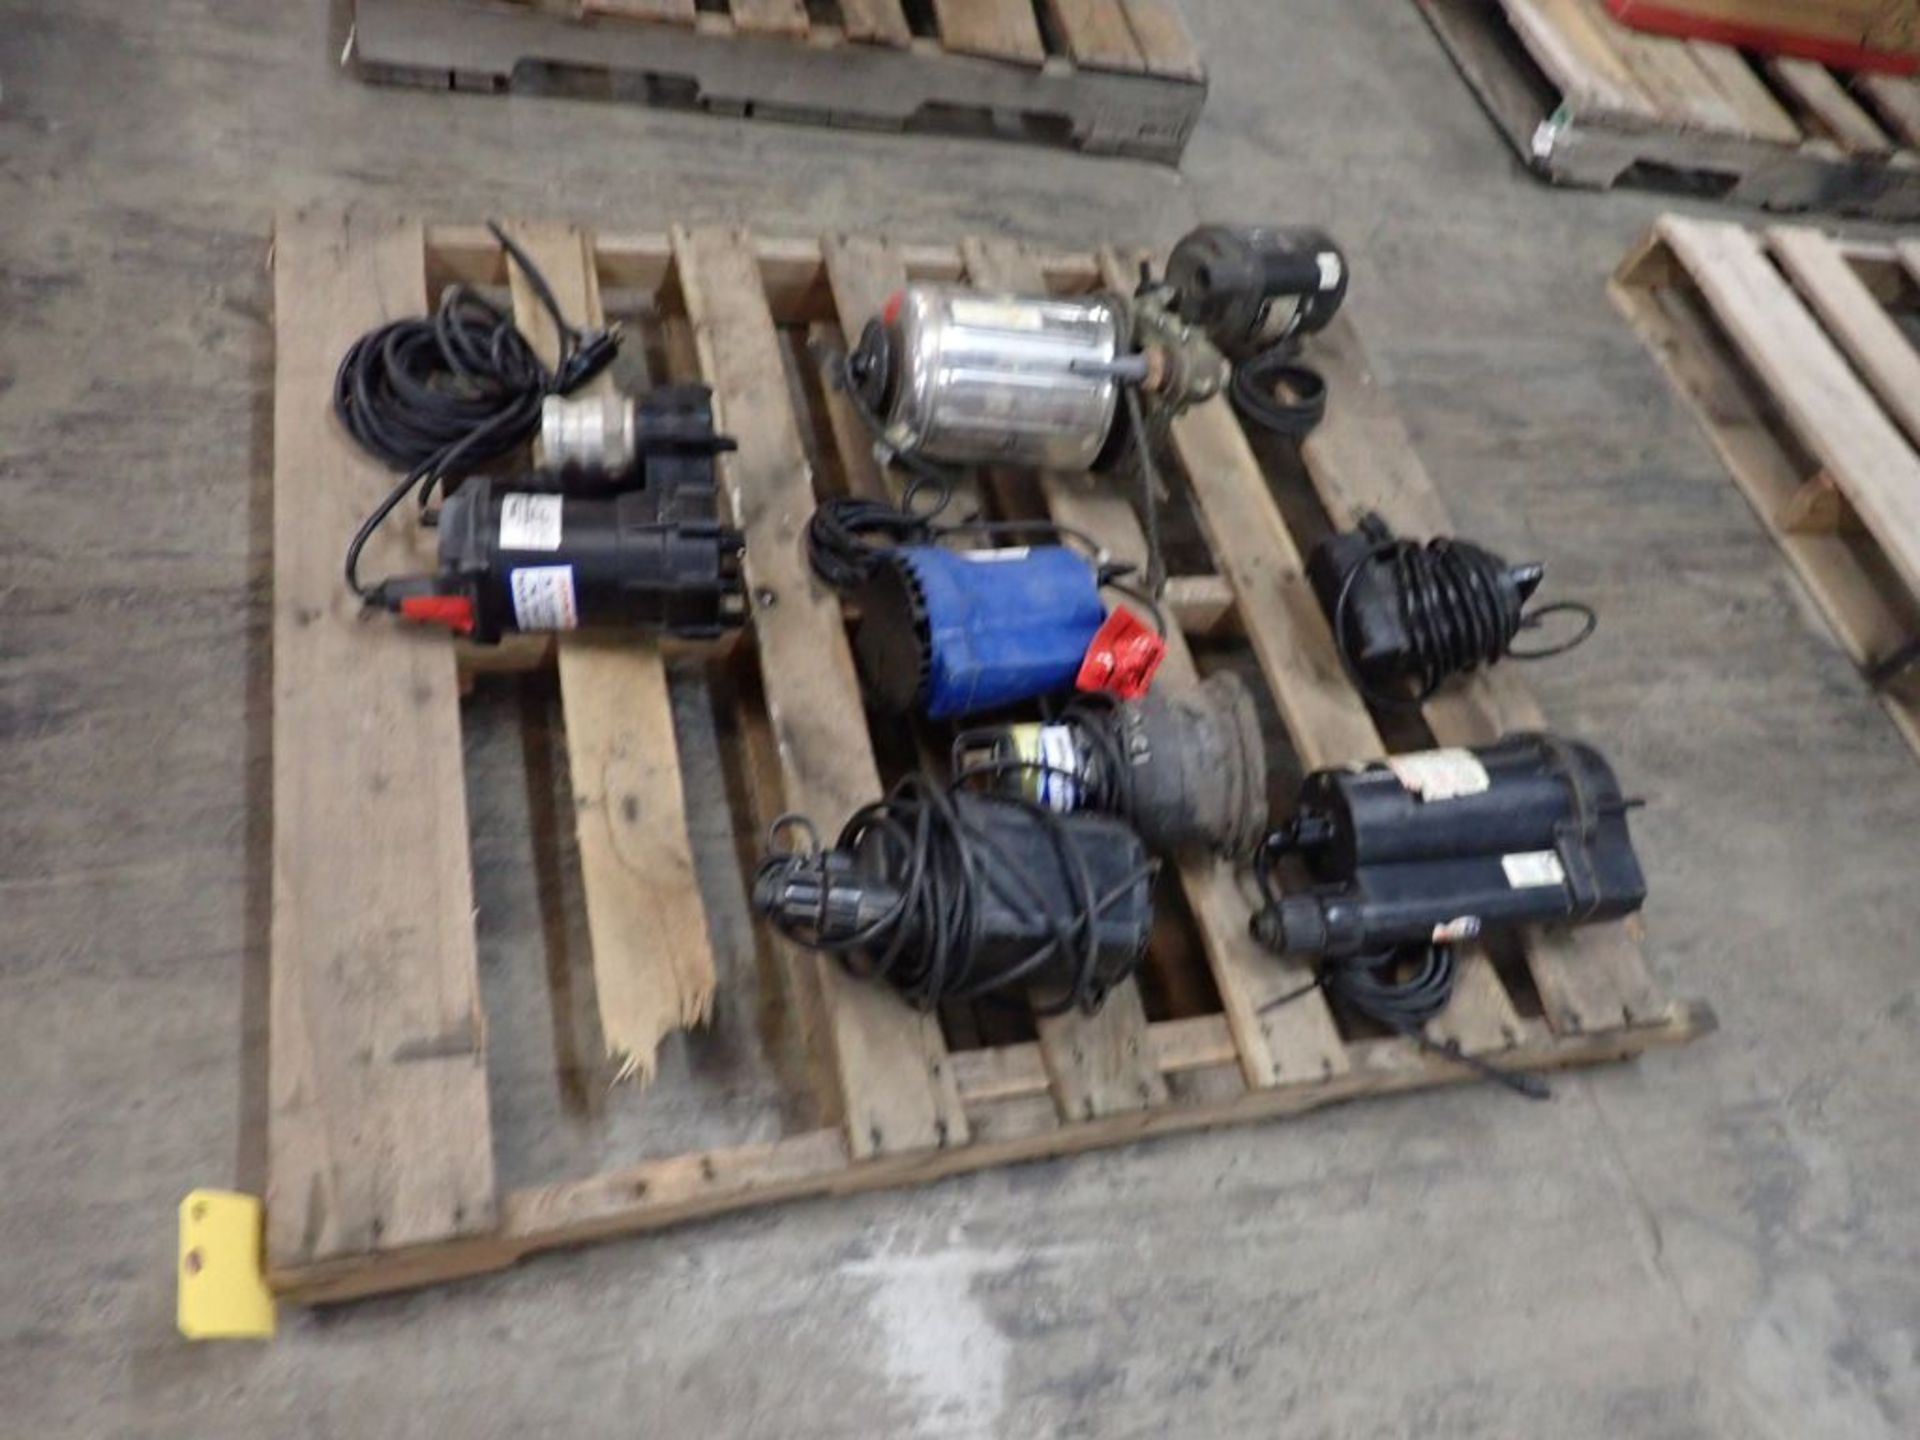 Lot of Assorted Submersible Pumps - Brands Include: DRS; Northern Industrial; Simer; Tag: 215079 - Image 2 of 18